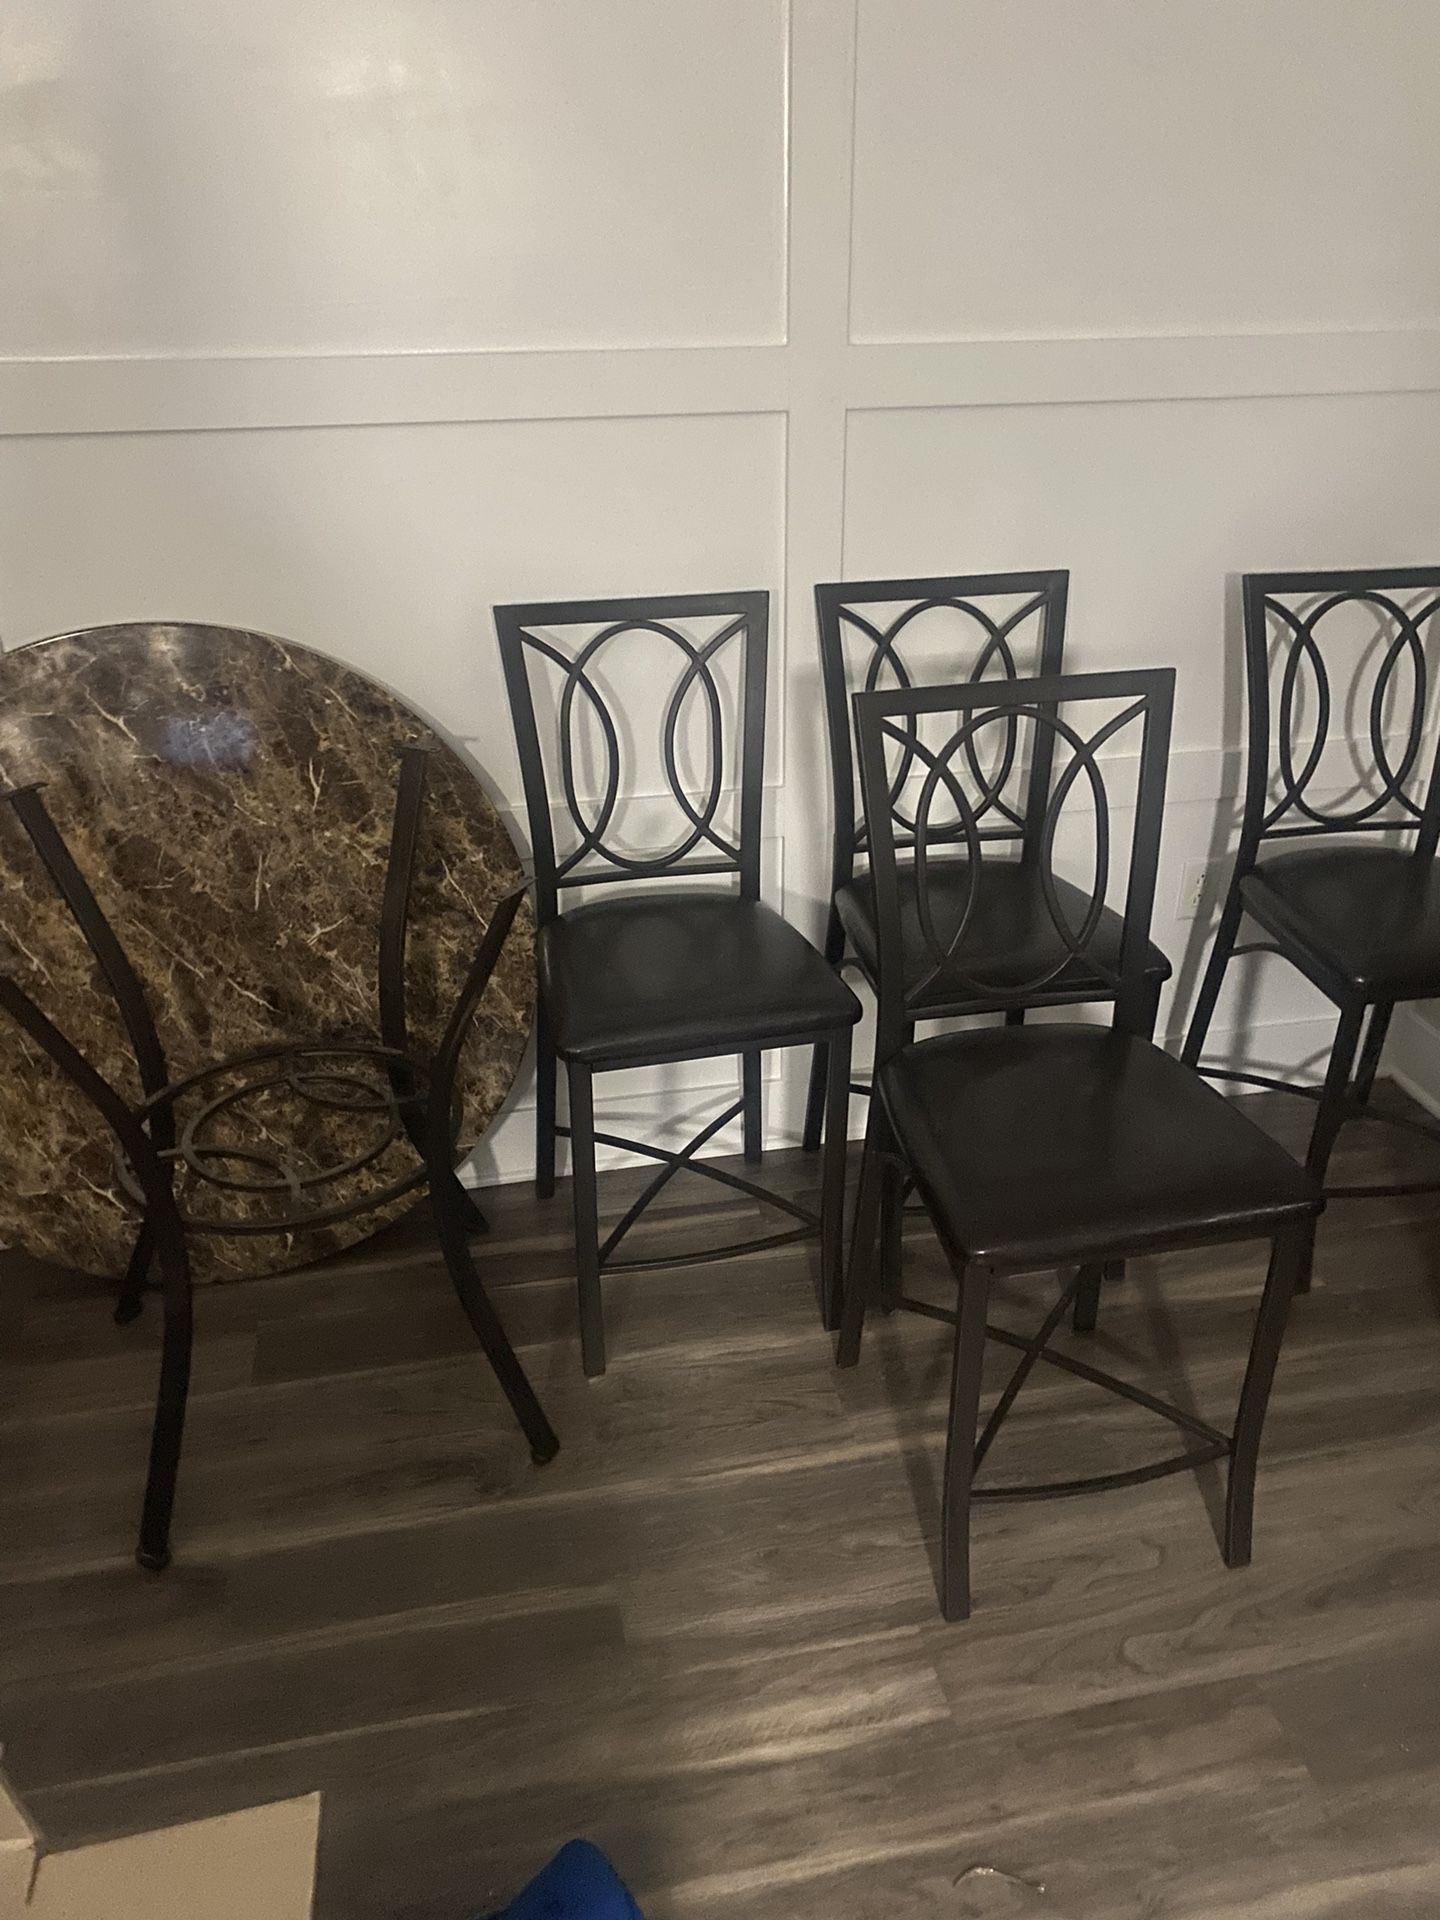 New Round Dining Table And New Chairs For Sale.